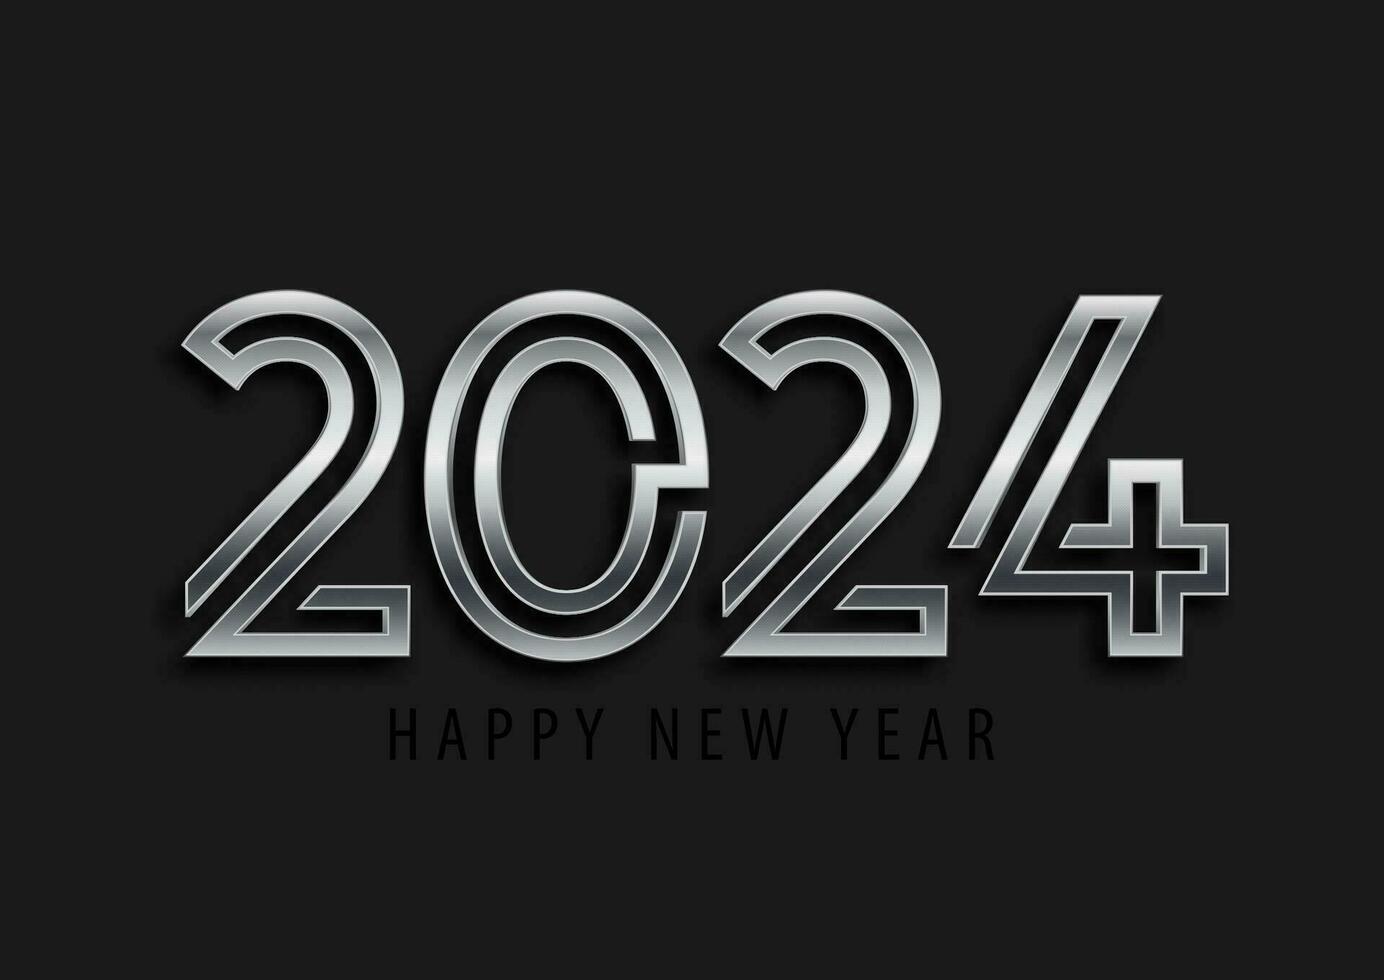 Happy New Year background with modern metallic silver numbers vector